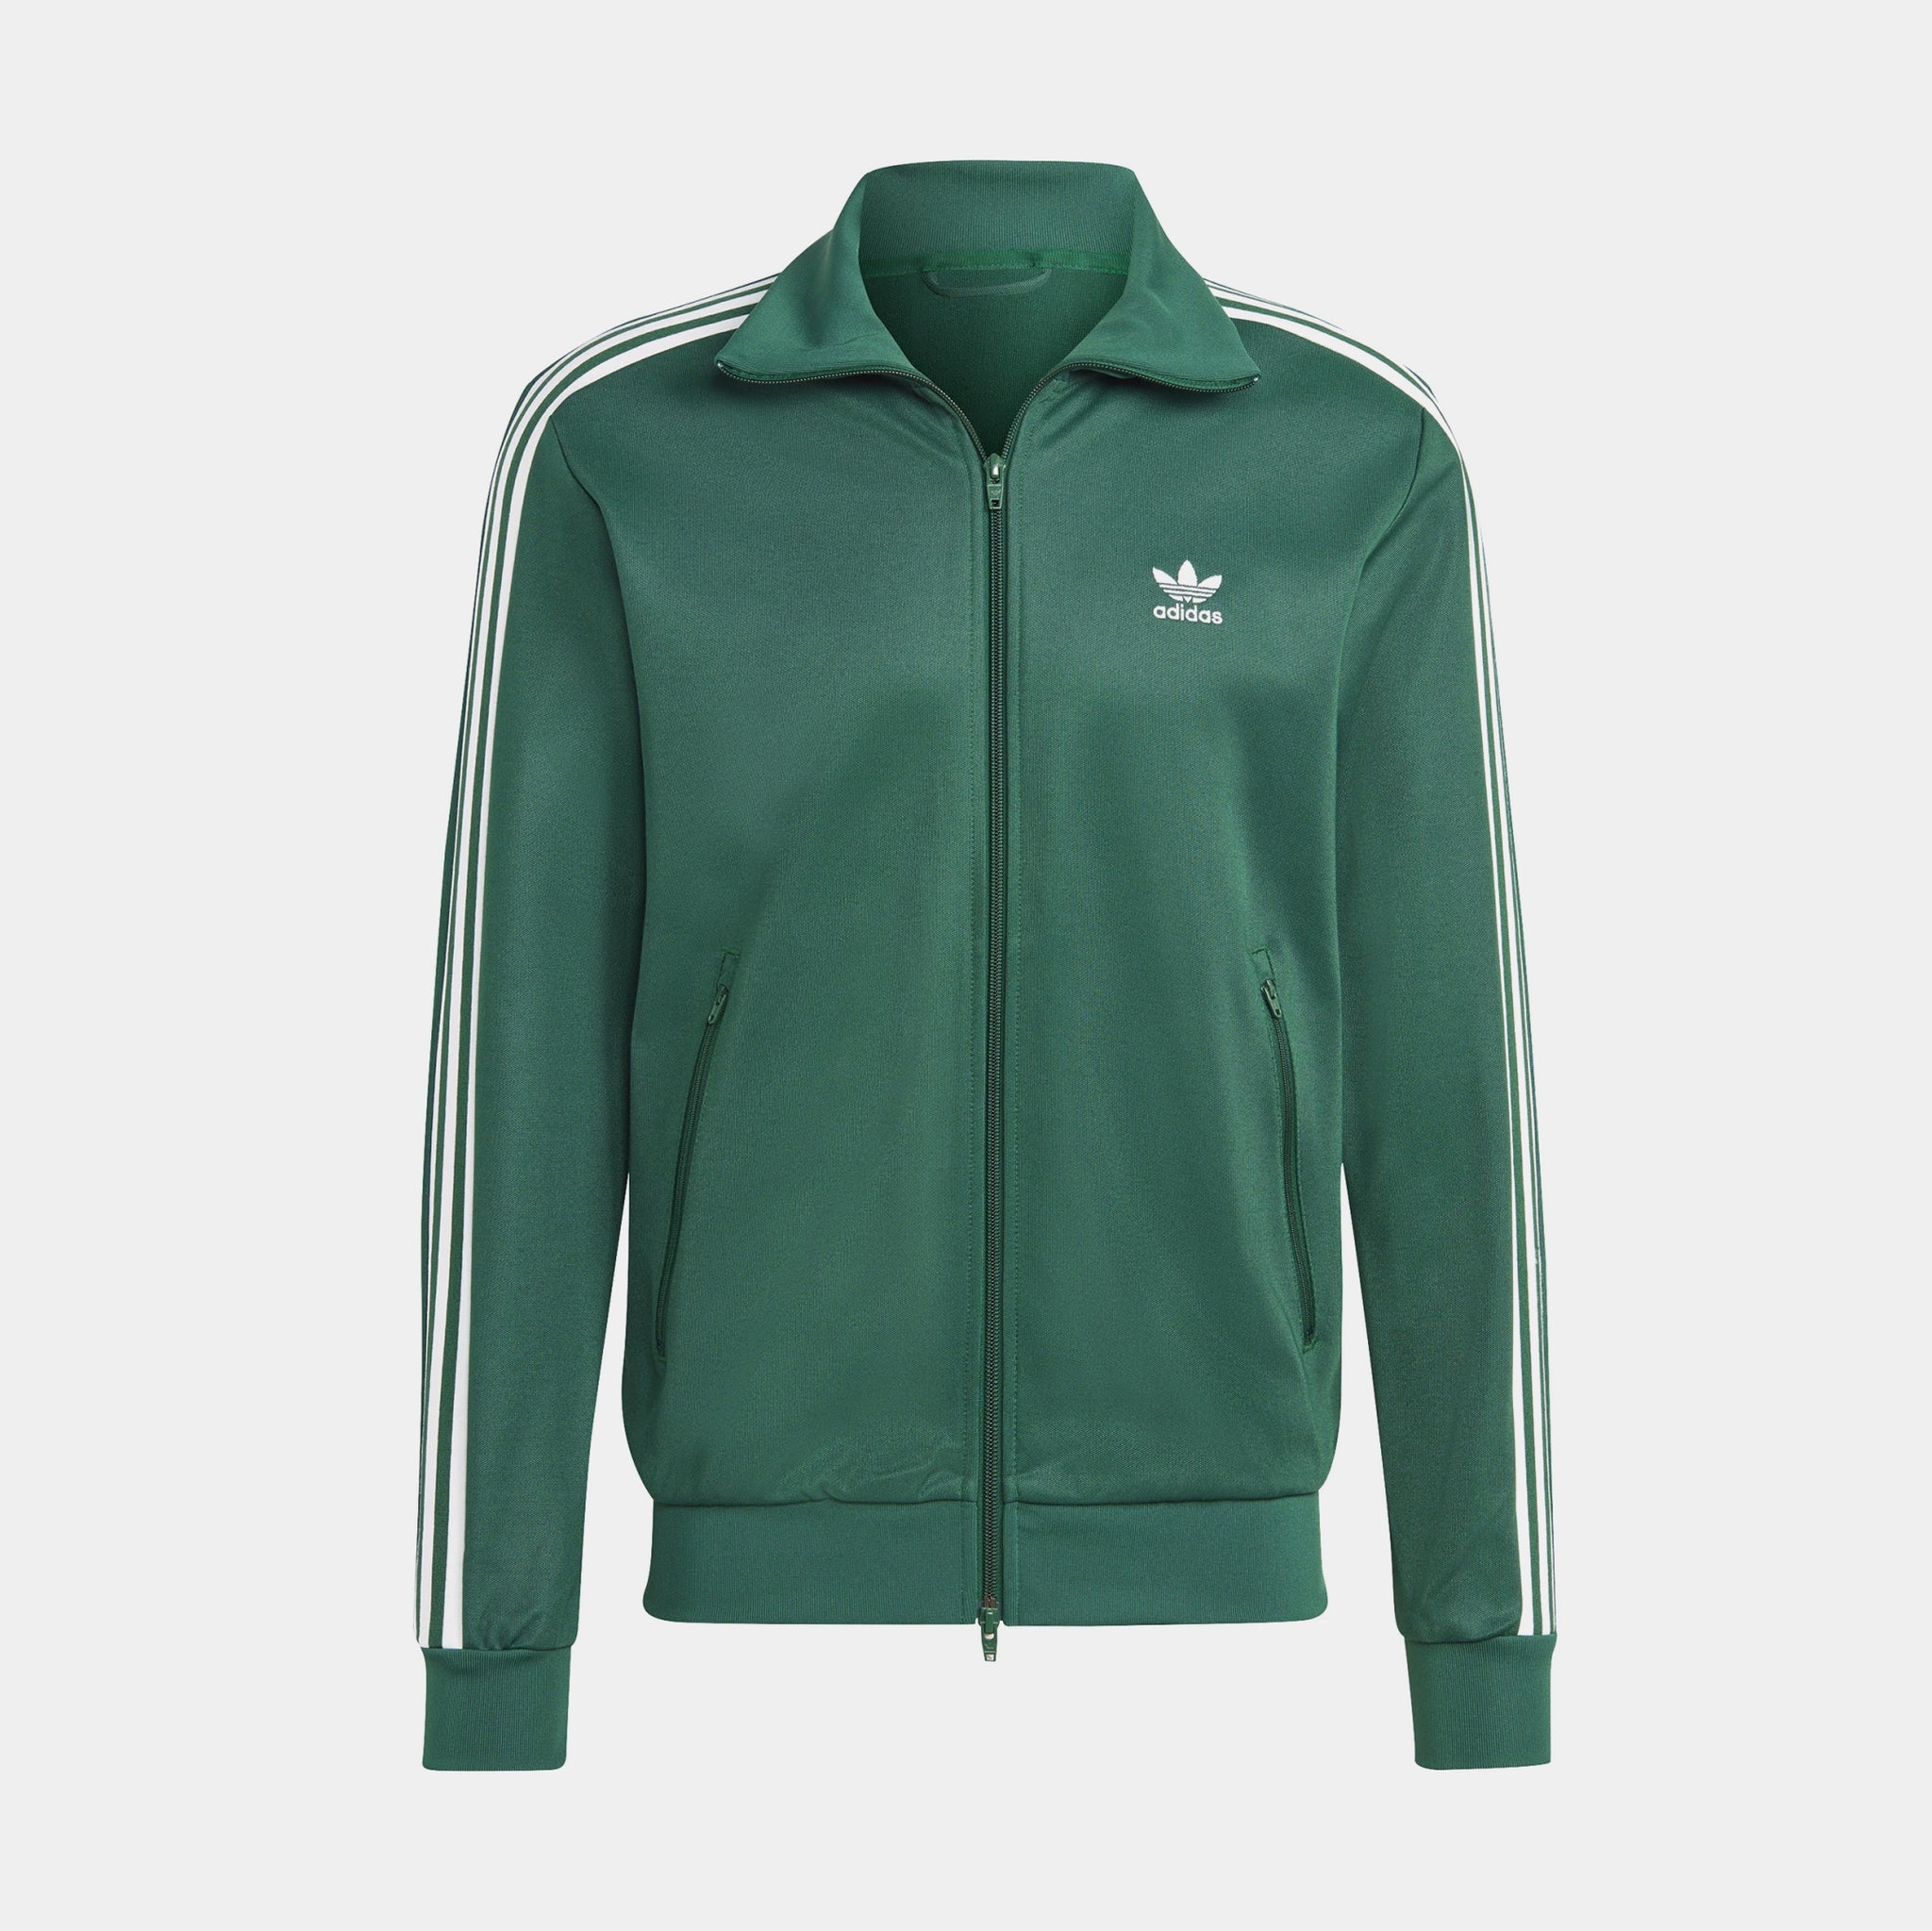 Adidas Original Sport Jacket , Men's Fashion, Coats, Jackets and Outerwear  on Carousell